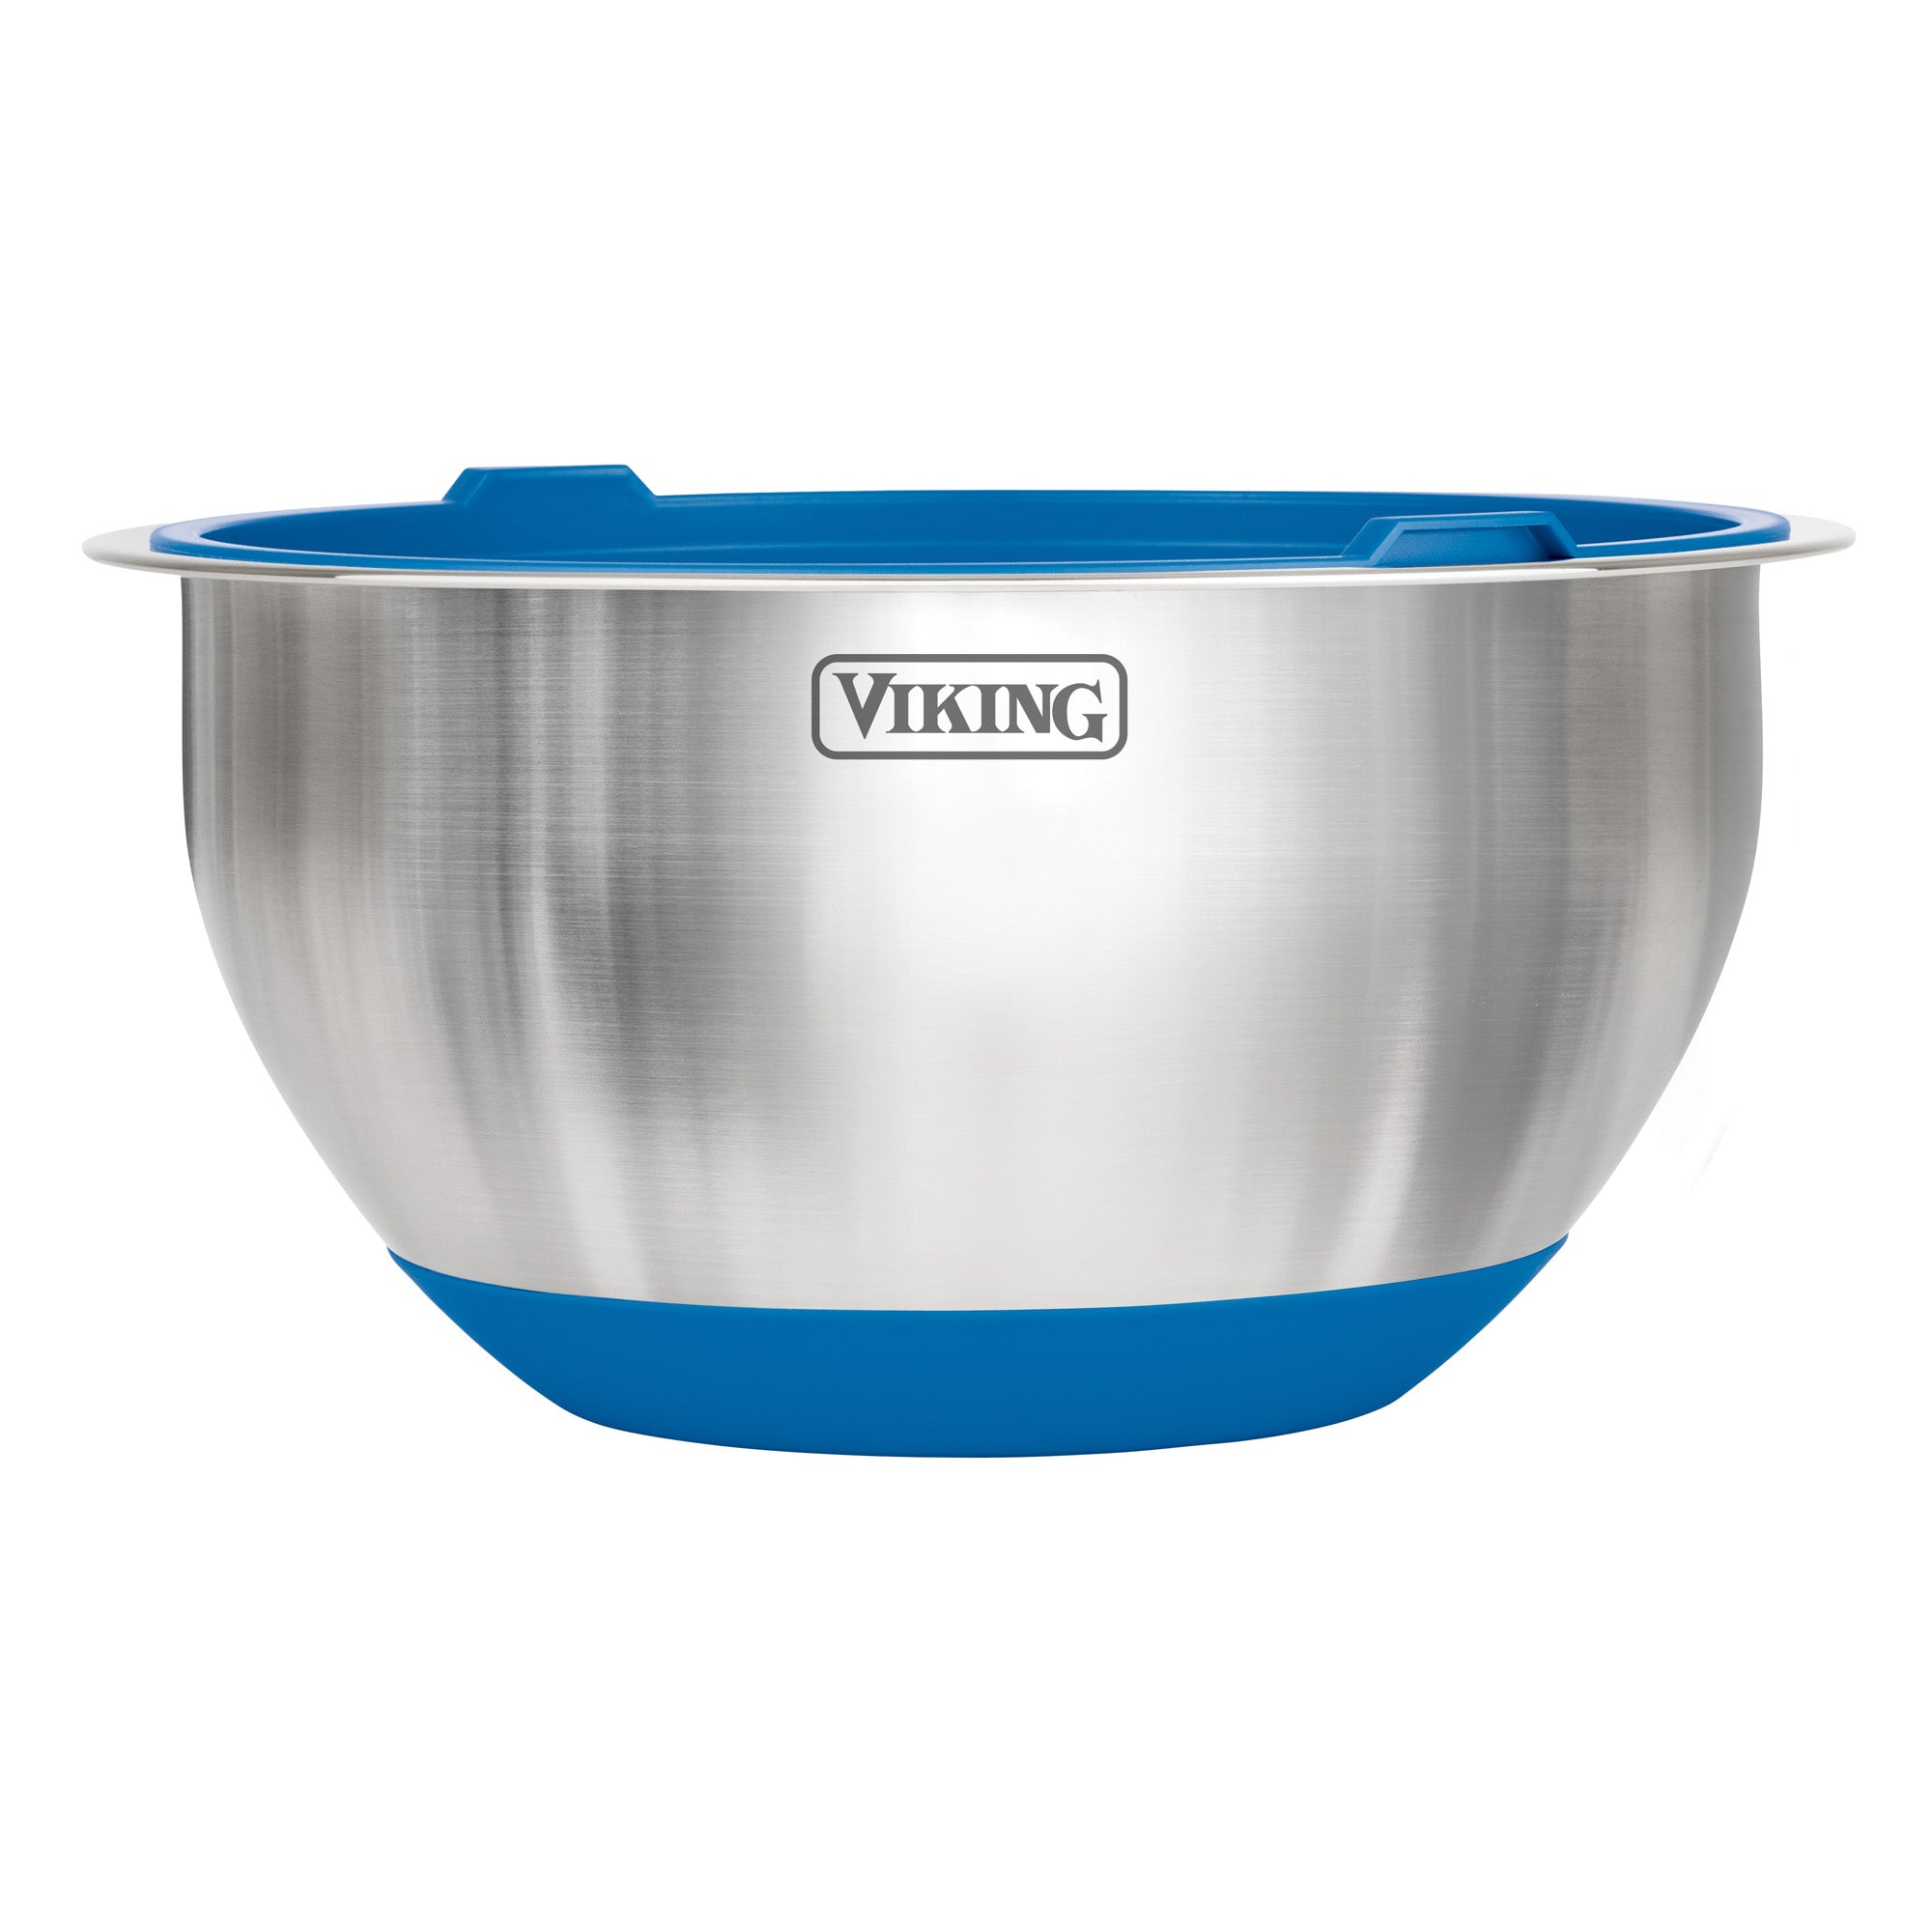 Viking 10-Piece Stainless Steel Mixing Bowl Set with Lids, Blue